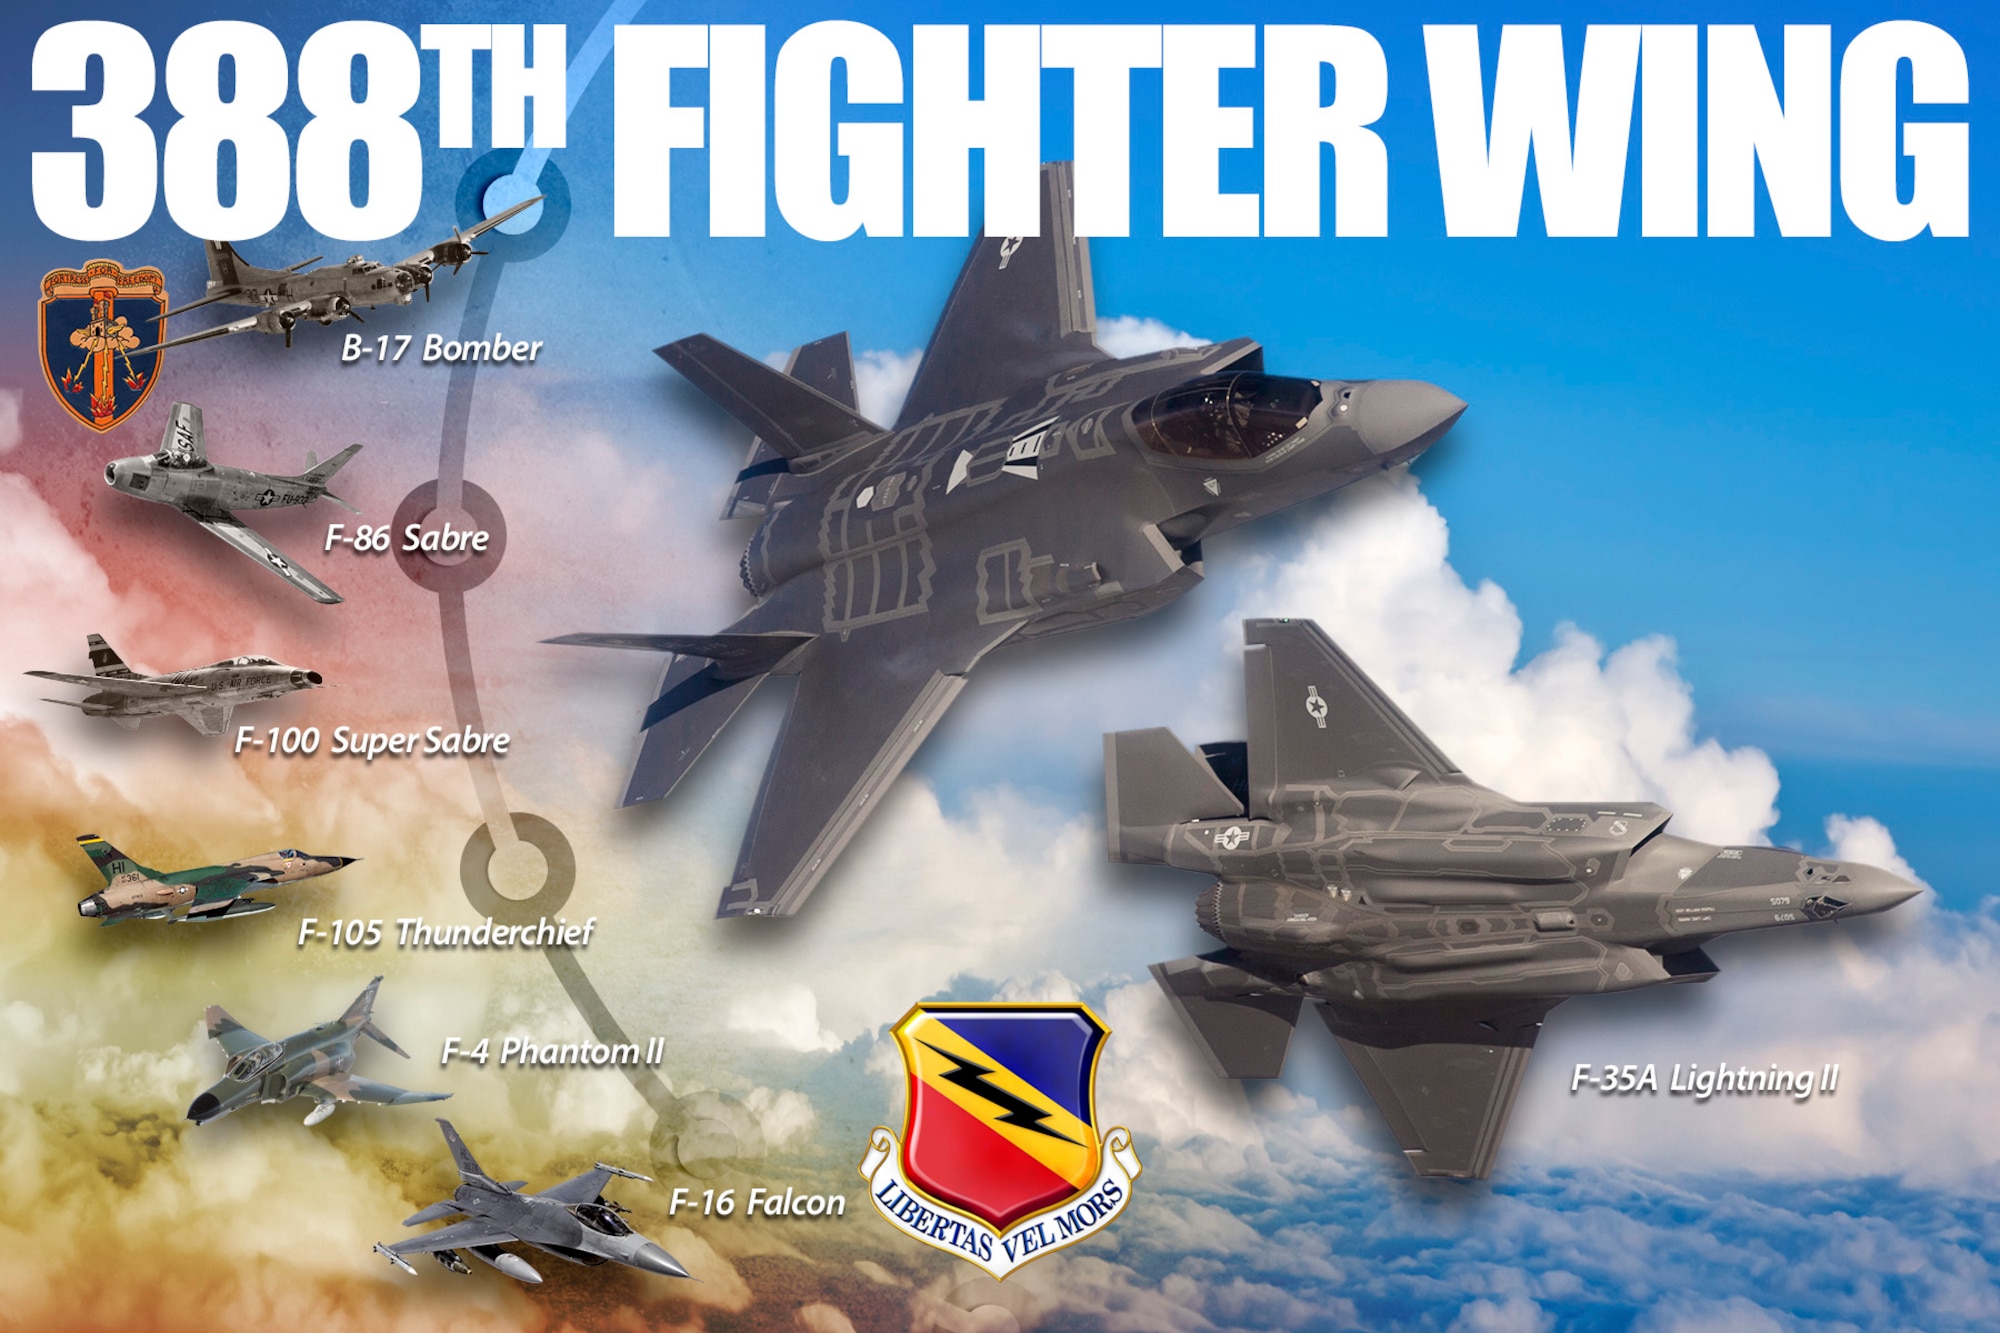 The 388th has flown many aircraft and missions since it's initial stand-up as the 388th Bombardment Group on Dec. 24, 1942. Now, the 388th Fighter Wing is responsible for employing the F-35A Lightning II aircraft worldwide in support of the national defense. (U.S. Air Force Graphic by David Perry)